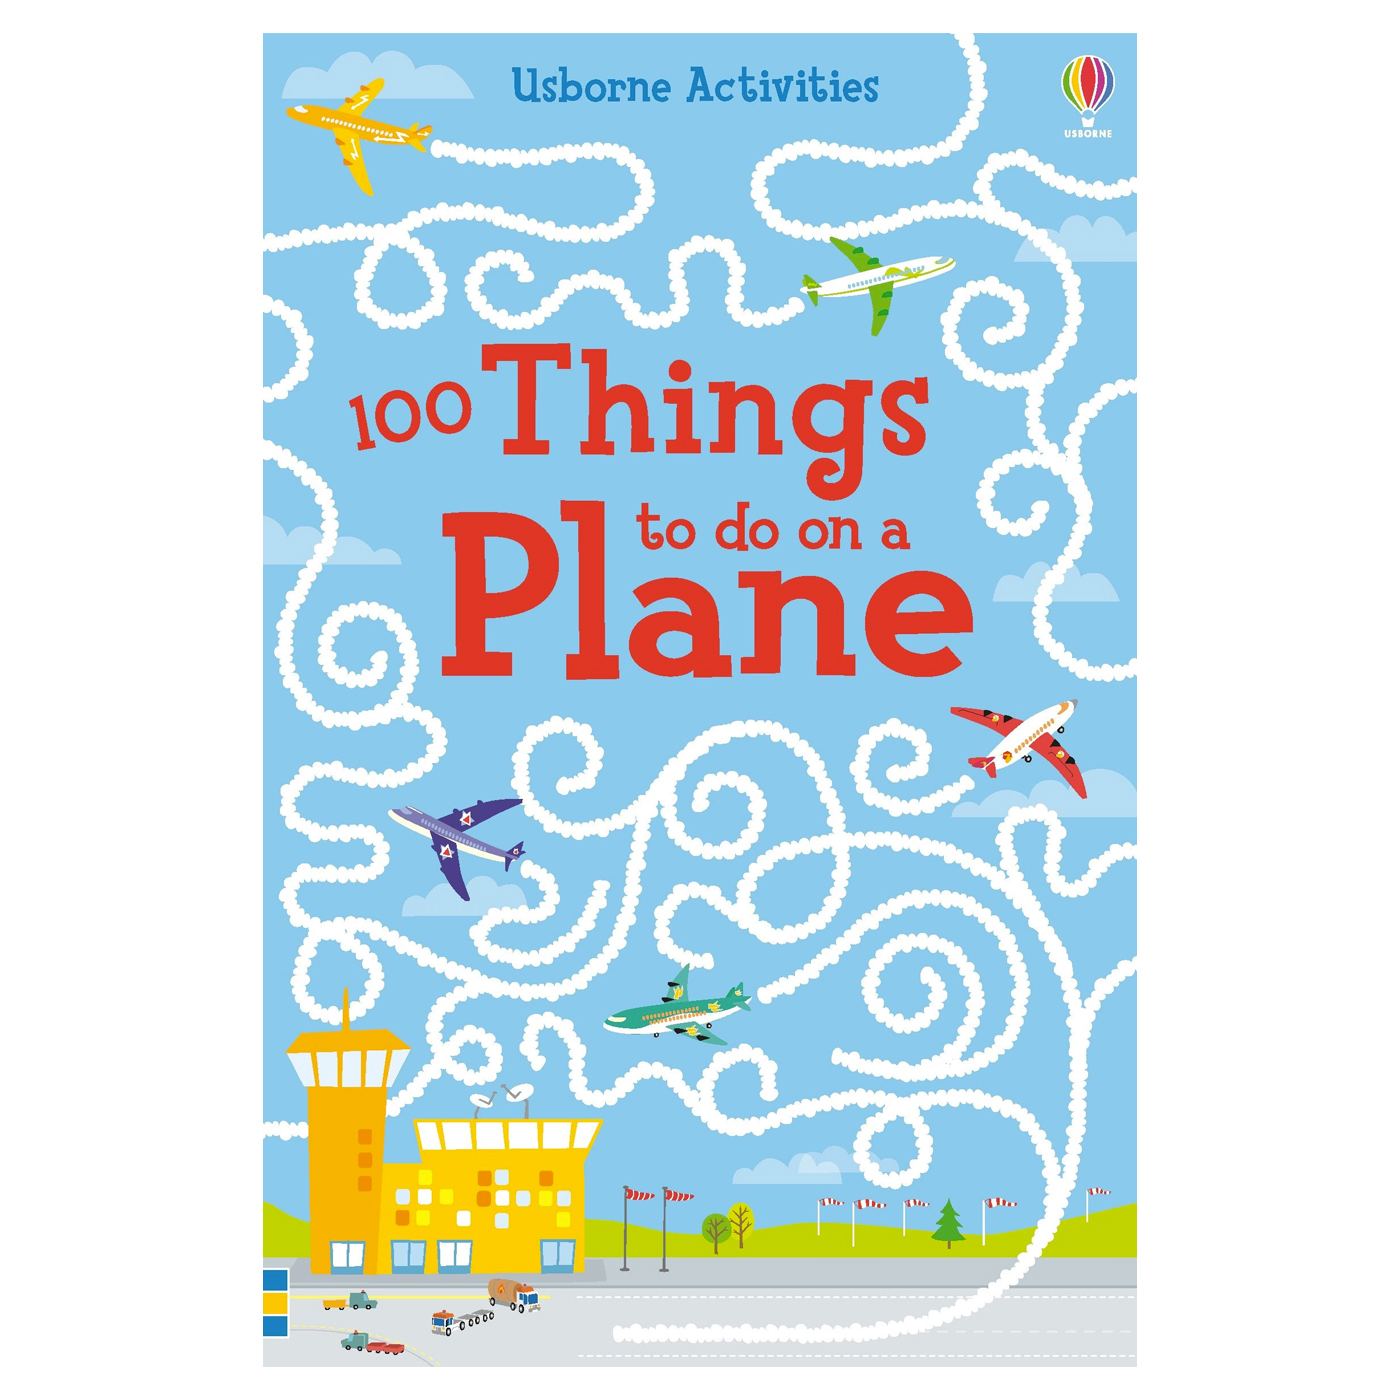  Over 100 Things To Do On a Plane